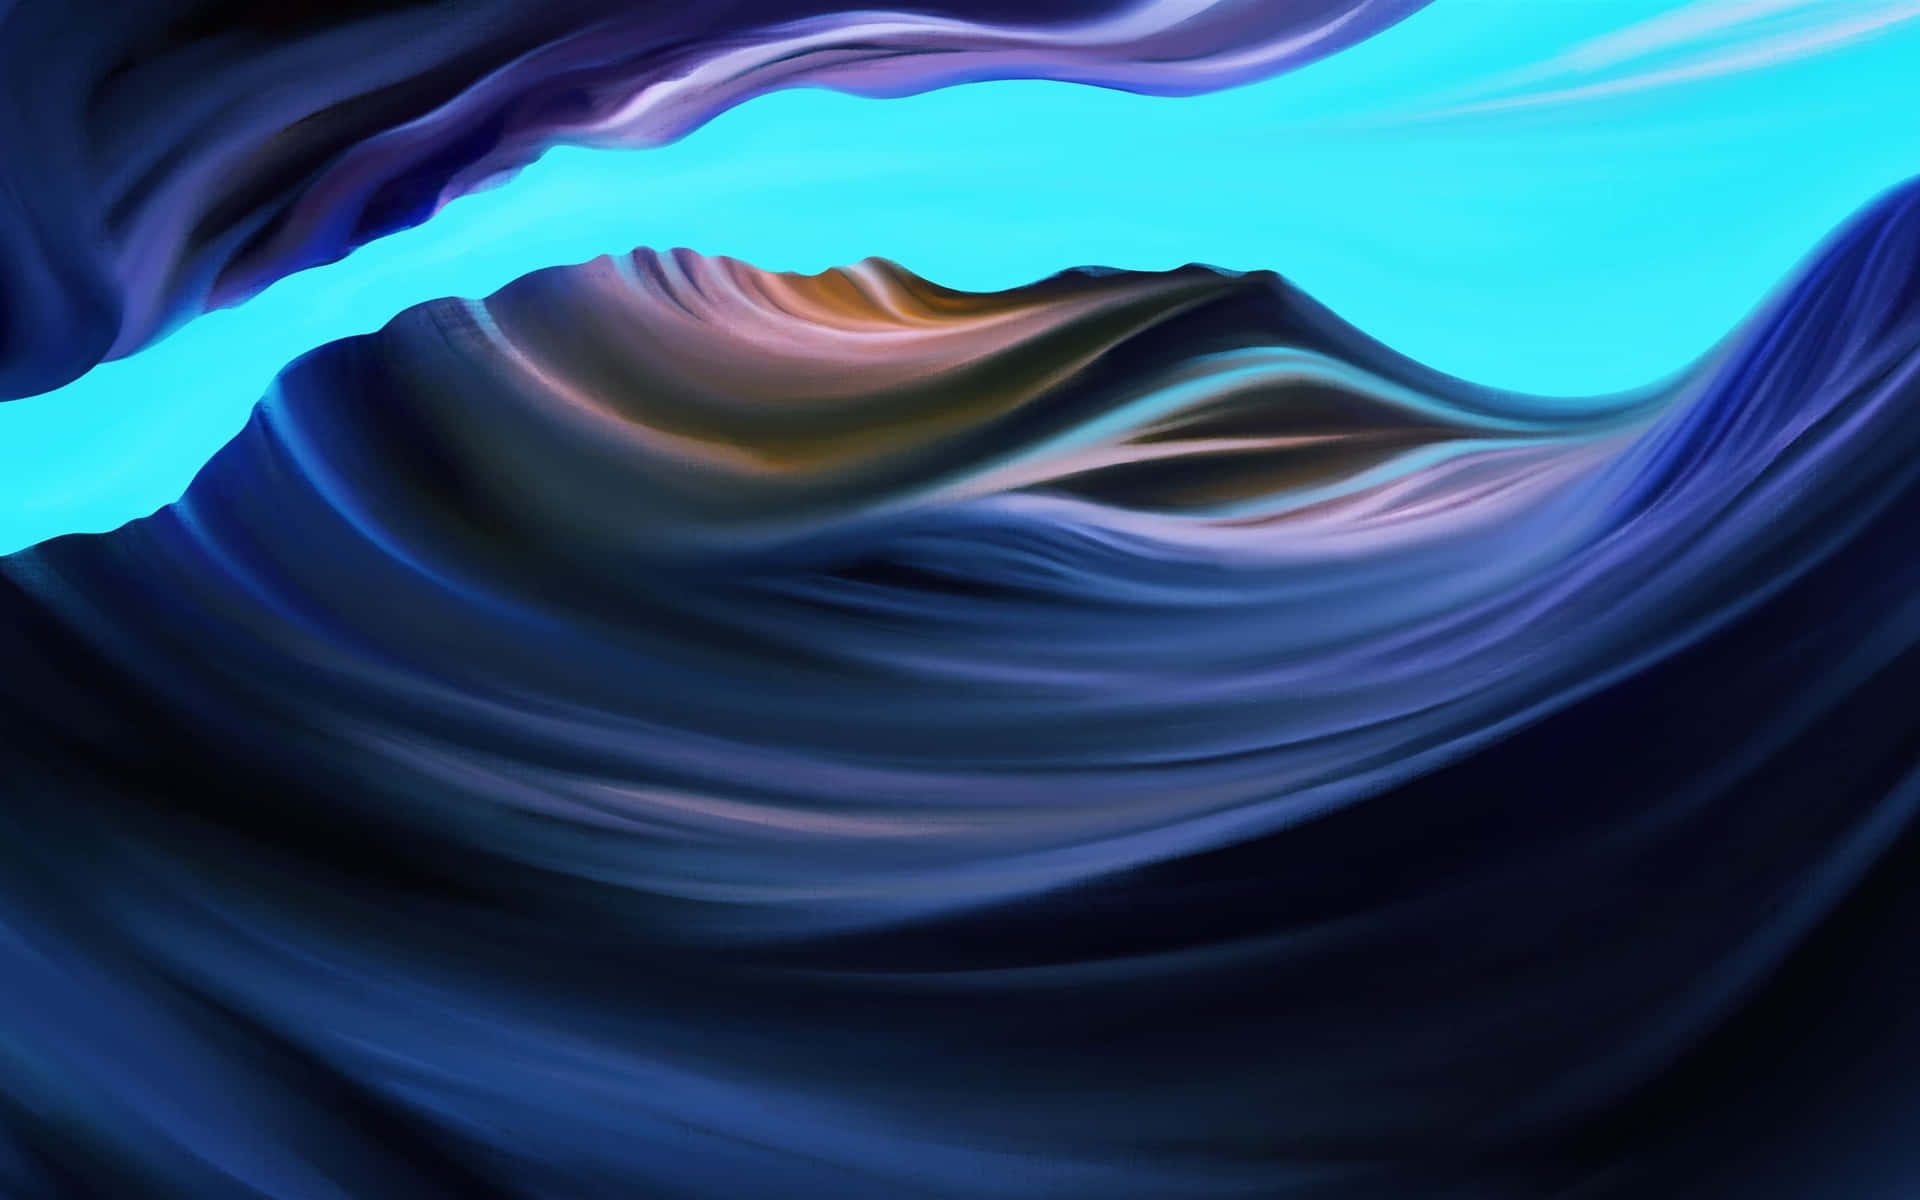 Get Ready to Be Amazed: Meet The Retina Macbook Wallpaper